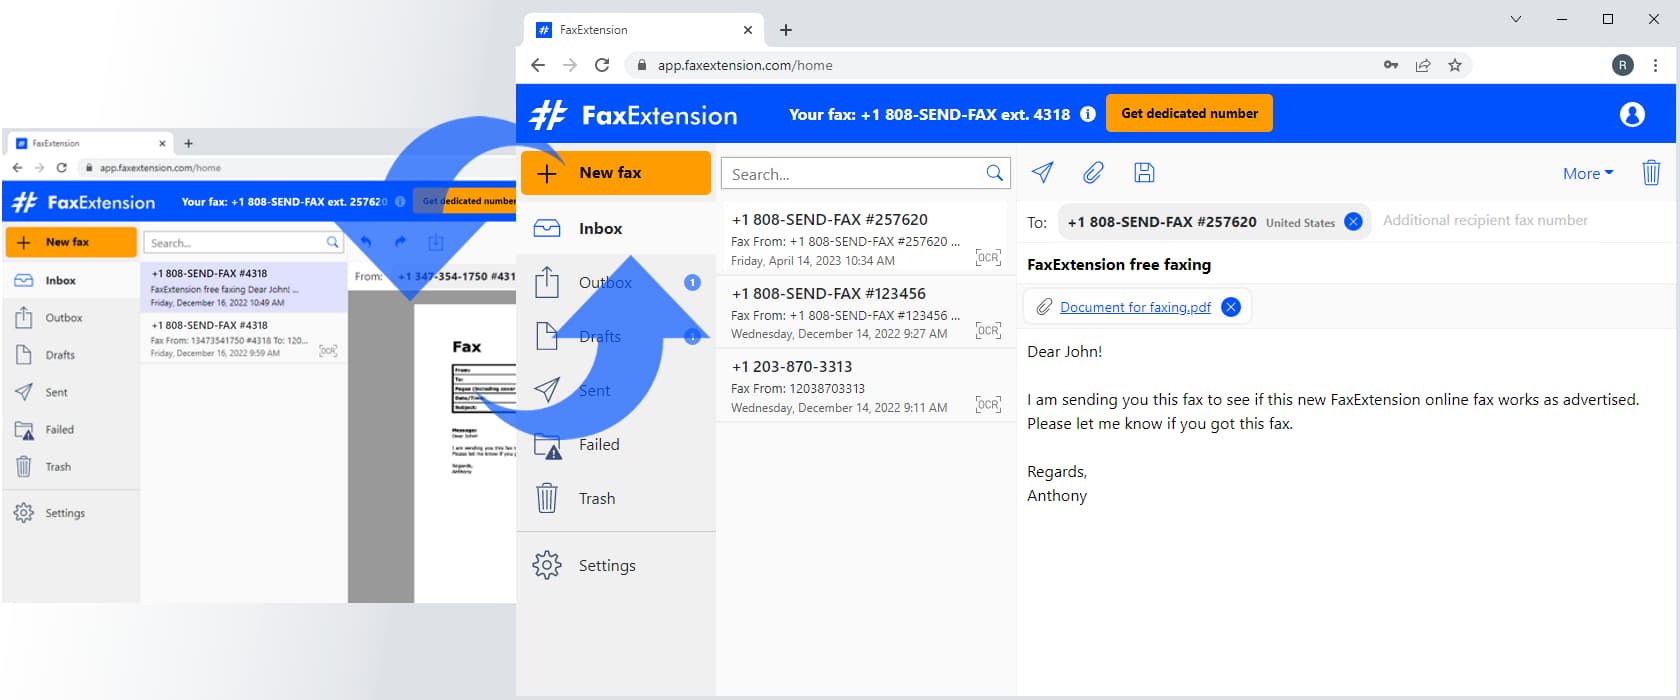 FaxExtension internet based fax service